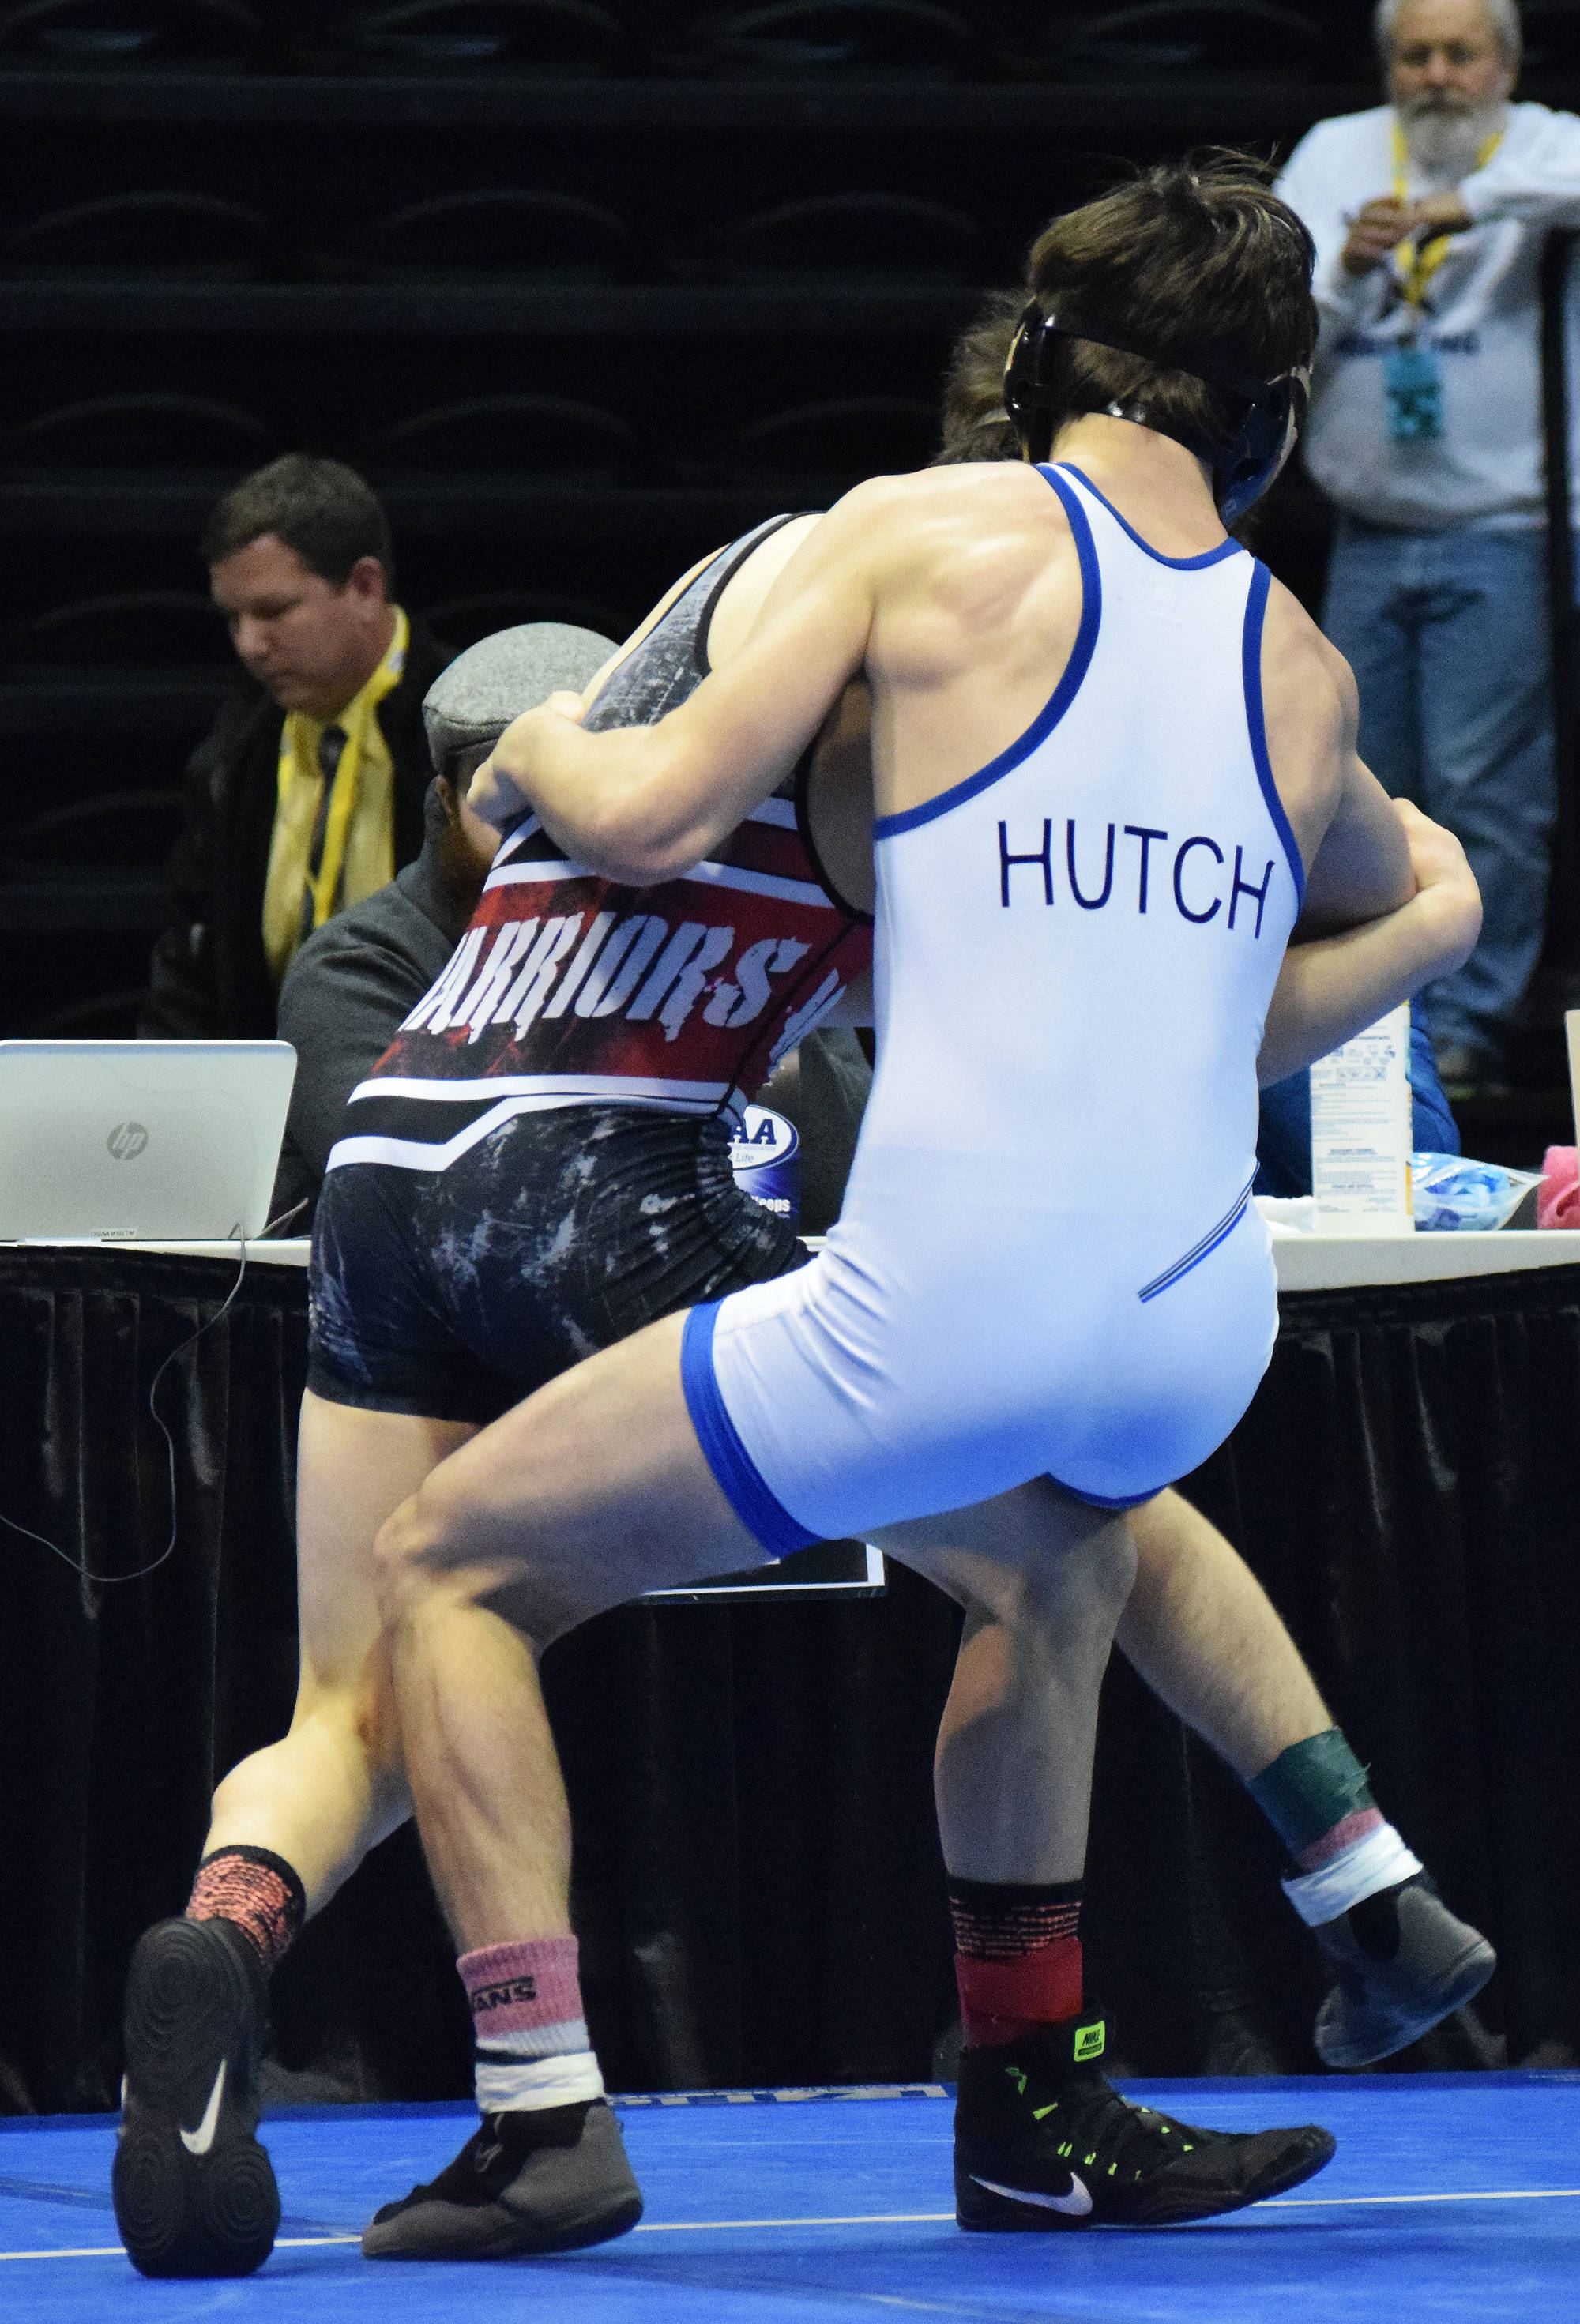 Soldotna junior Gideon Hutchison grapples with Wasilla’s Alex Logsdon in the 120-pound final Saturday night at the Division I state wrestling championships at the Alaska Airlines Center in Anchorage. (Photo by Joey Klecka/Peninsula Clarion)